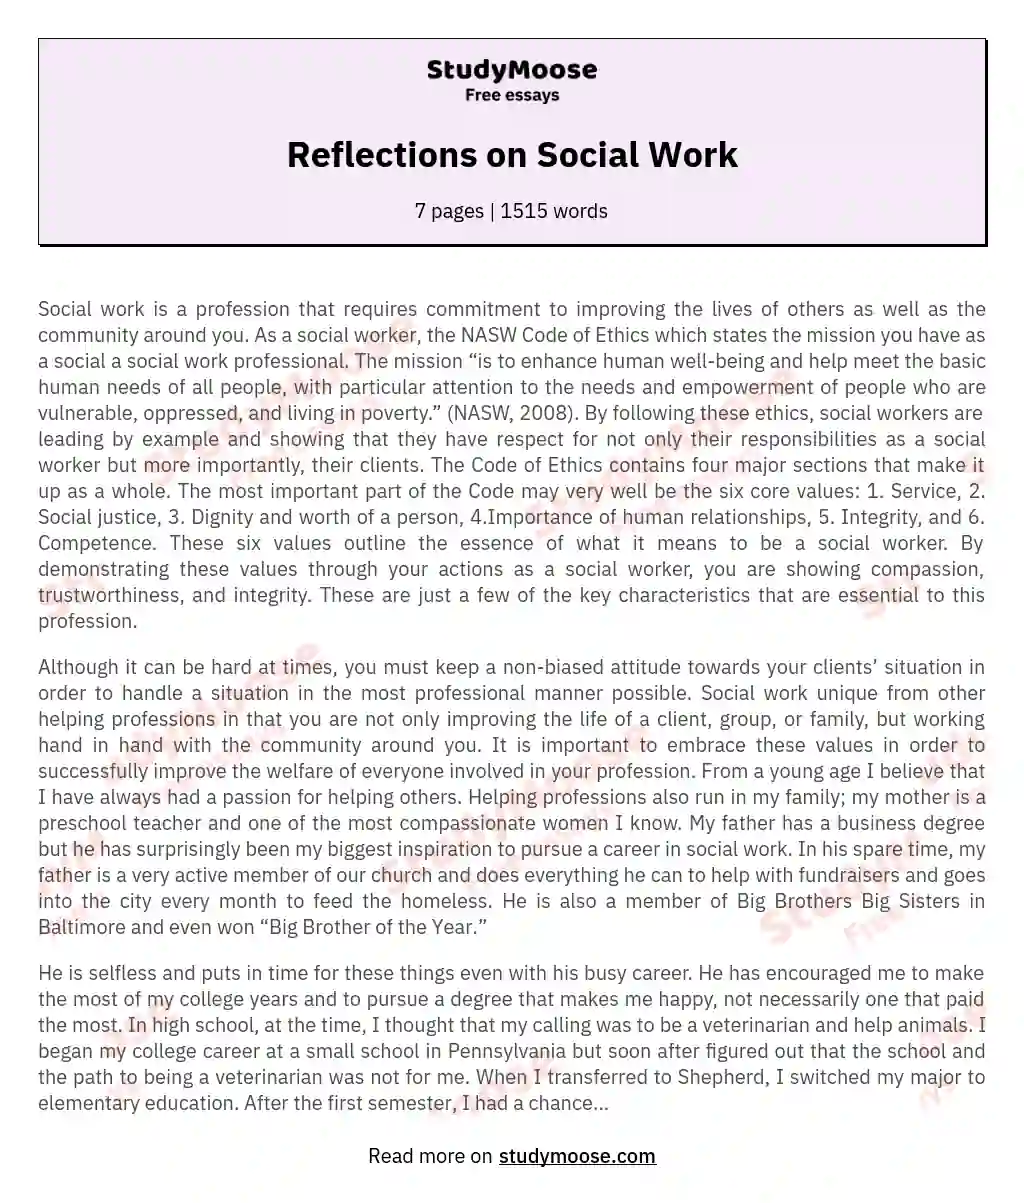 Reflections on Social Work essay